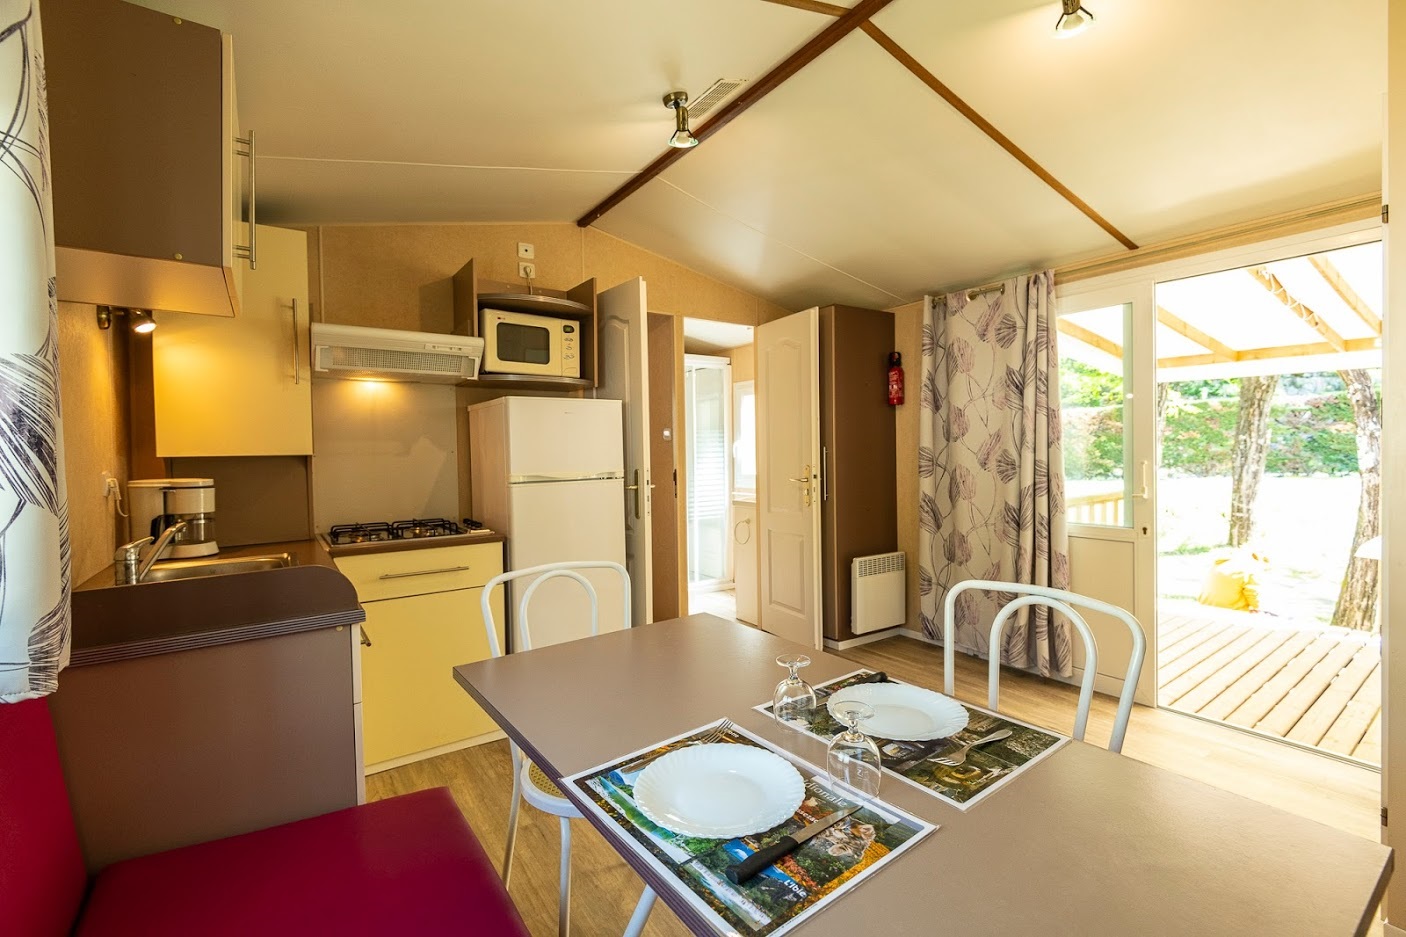 Location - Mobilhome Climatisé 2 Chambres - Camping Domaine Arleblanc